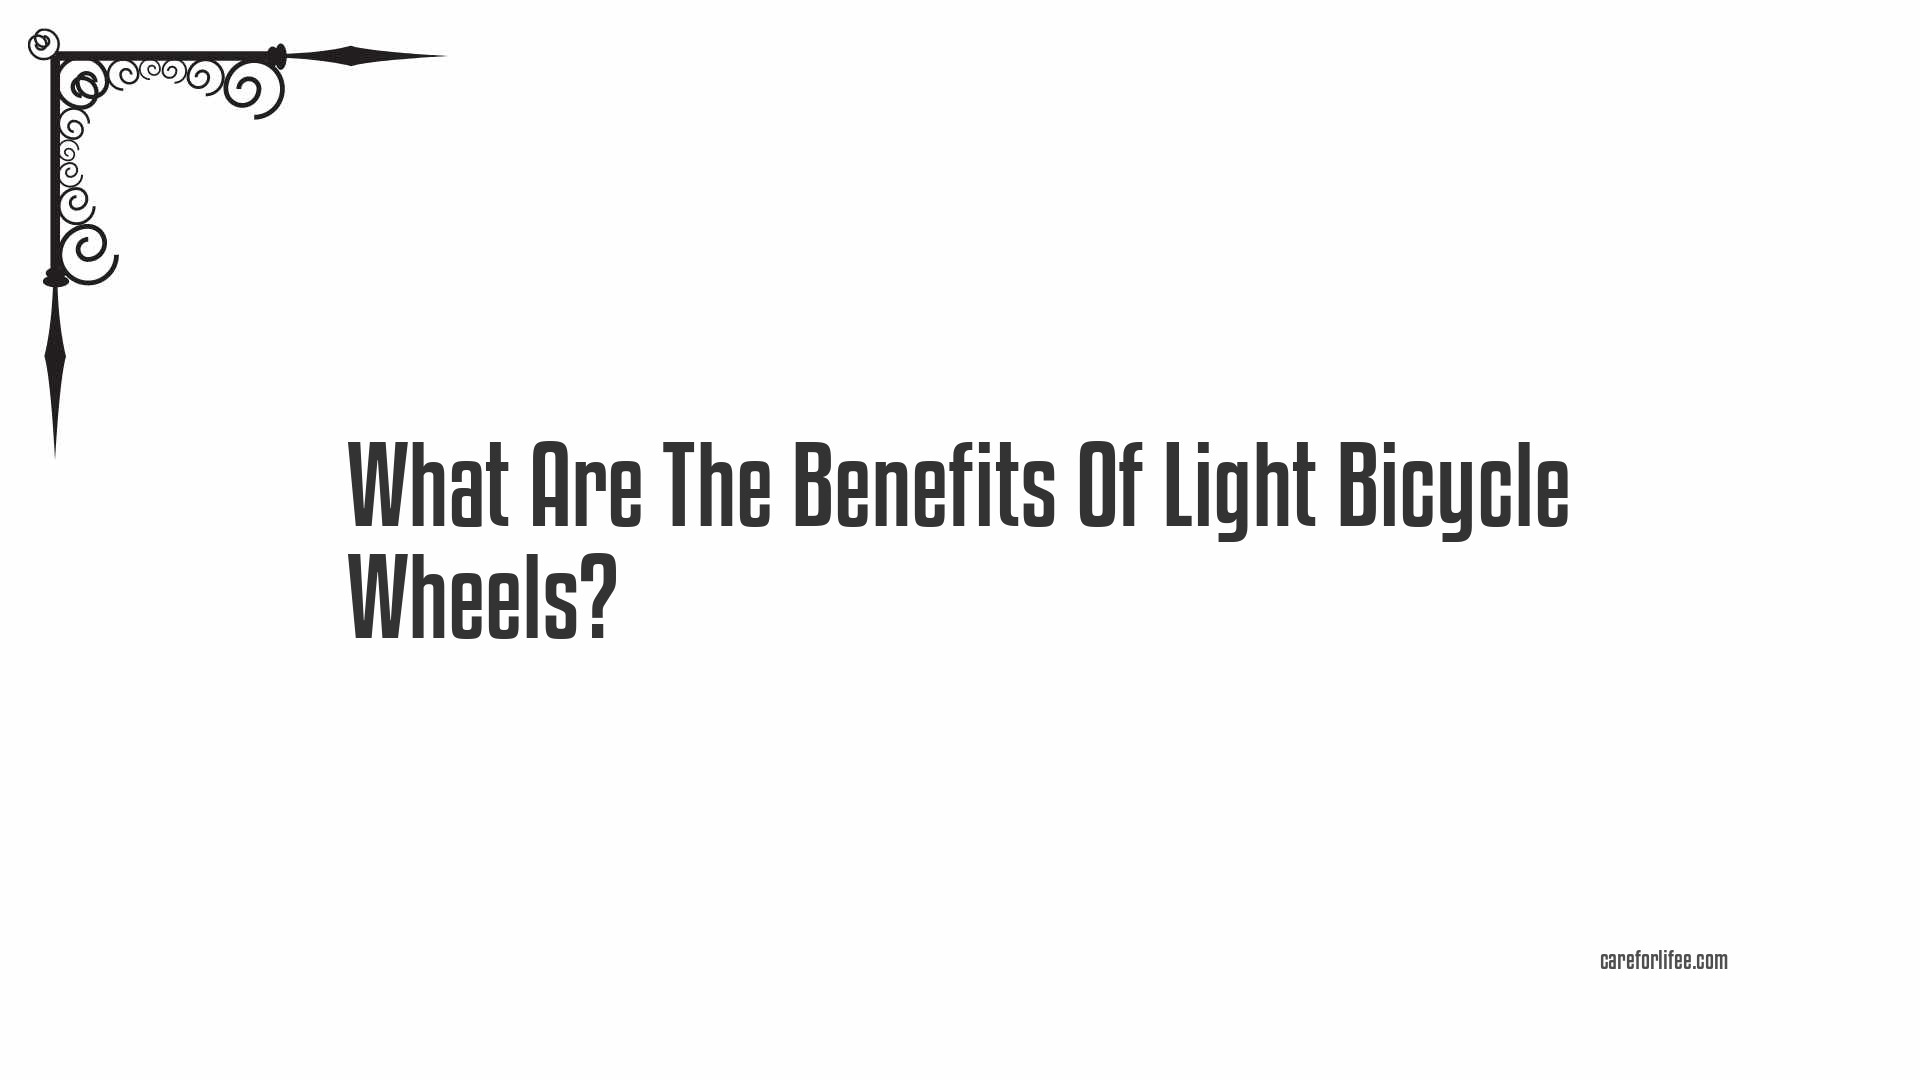 What Are The Benefits Of Light Bicycle Wheels?